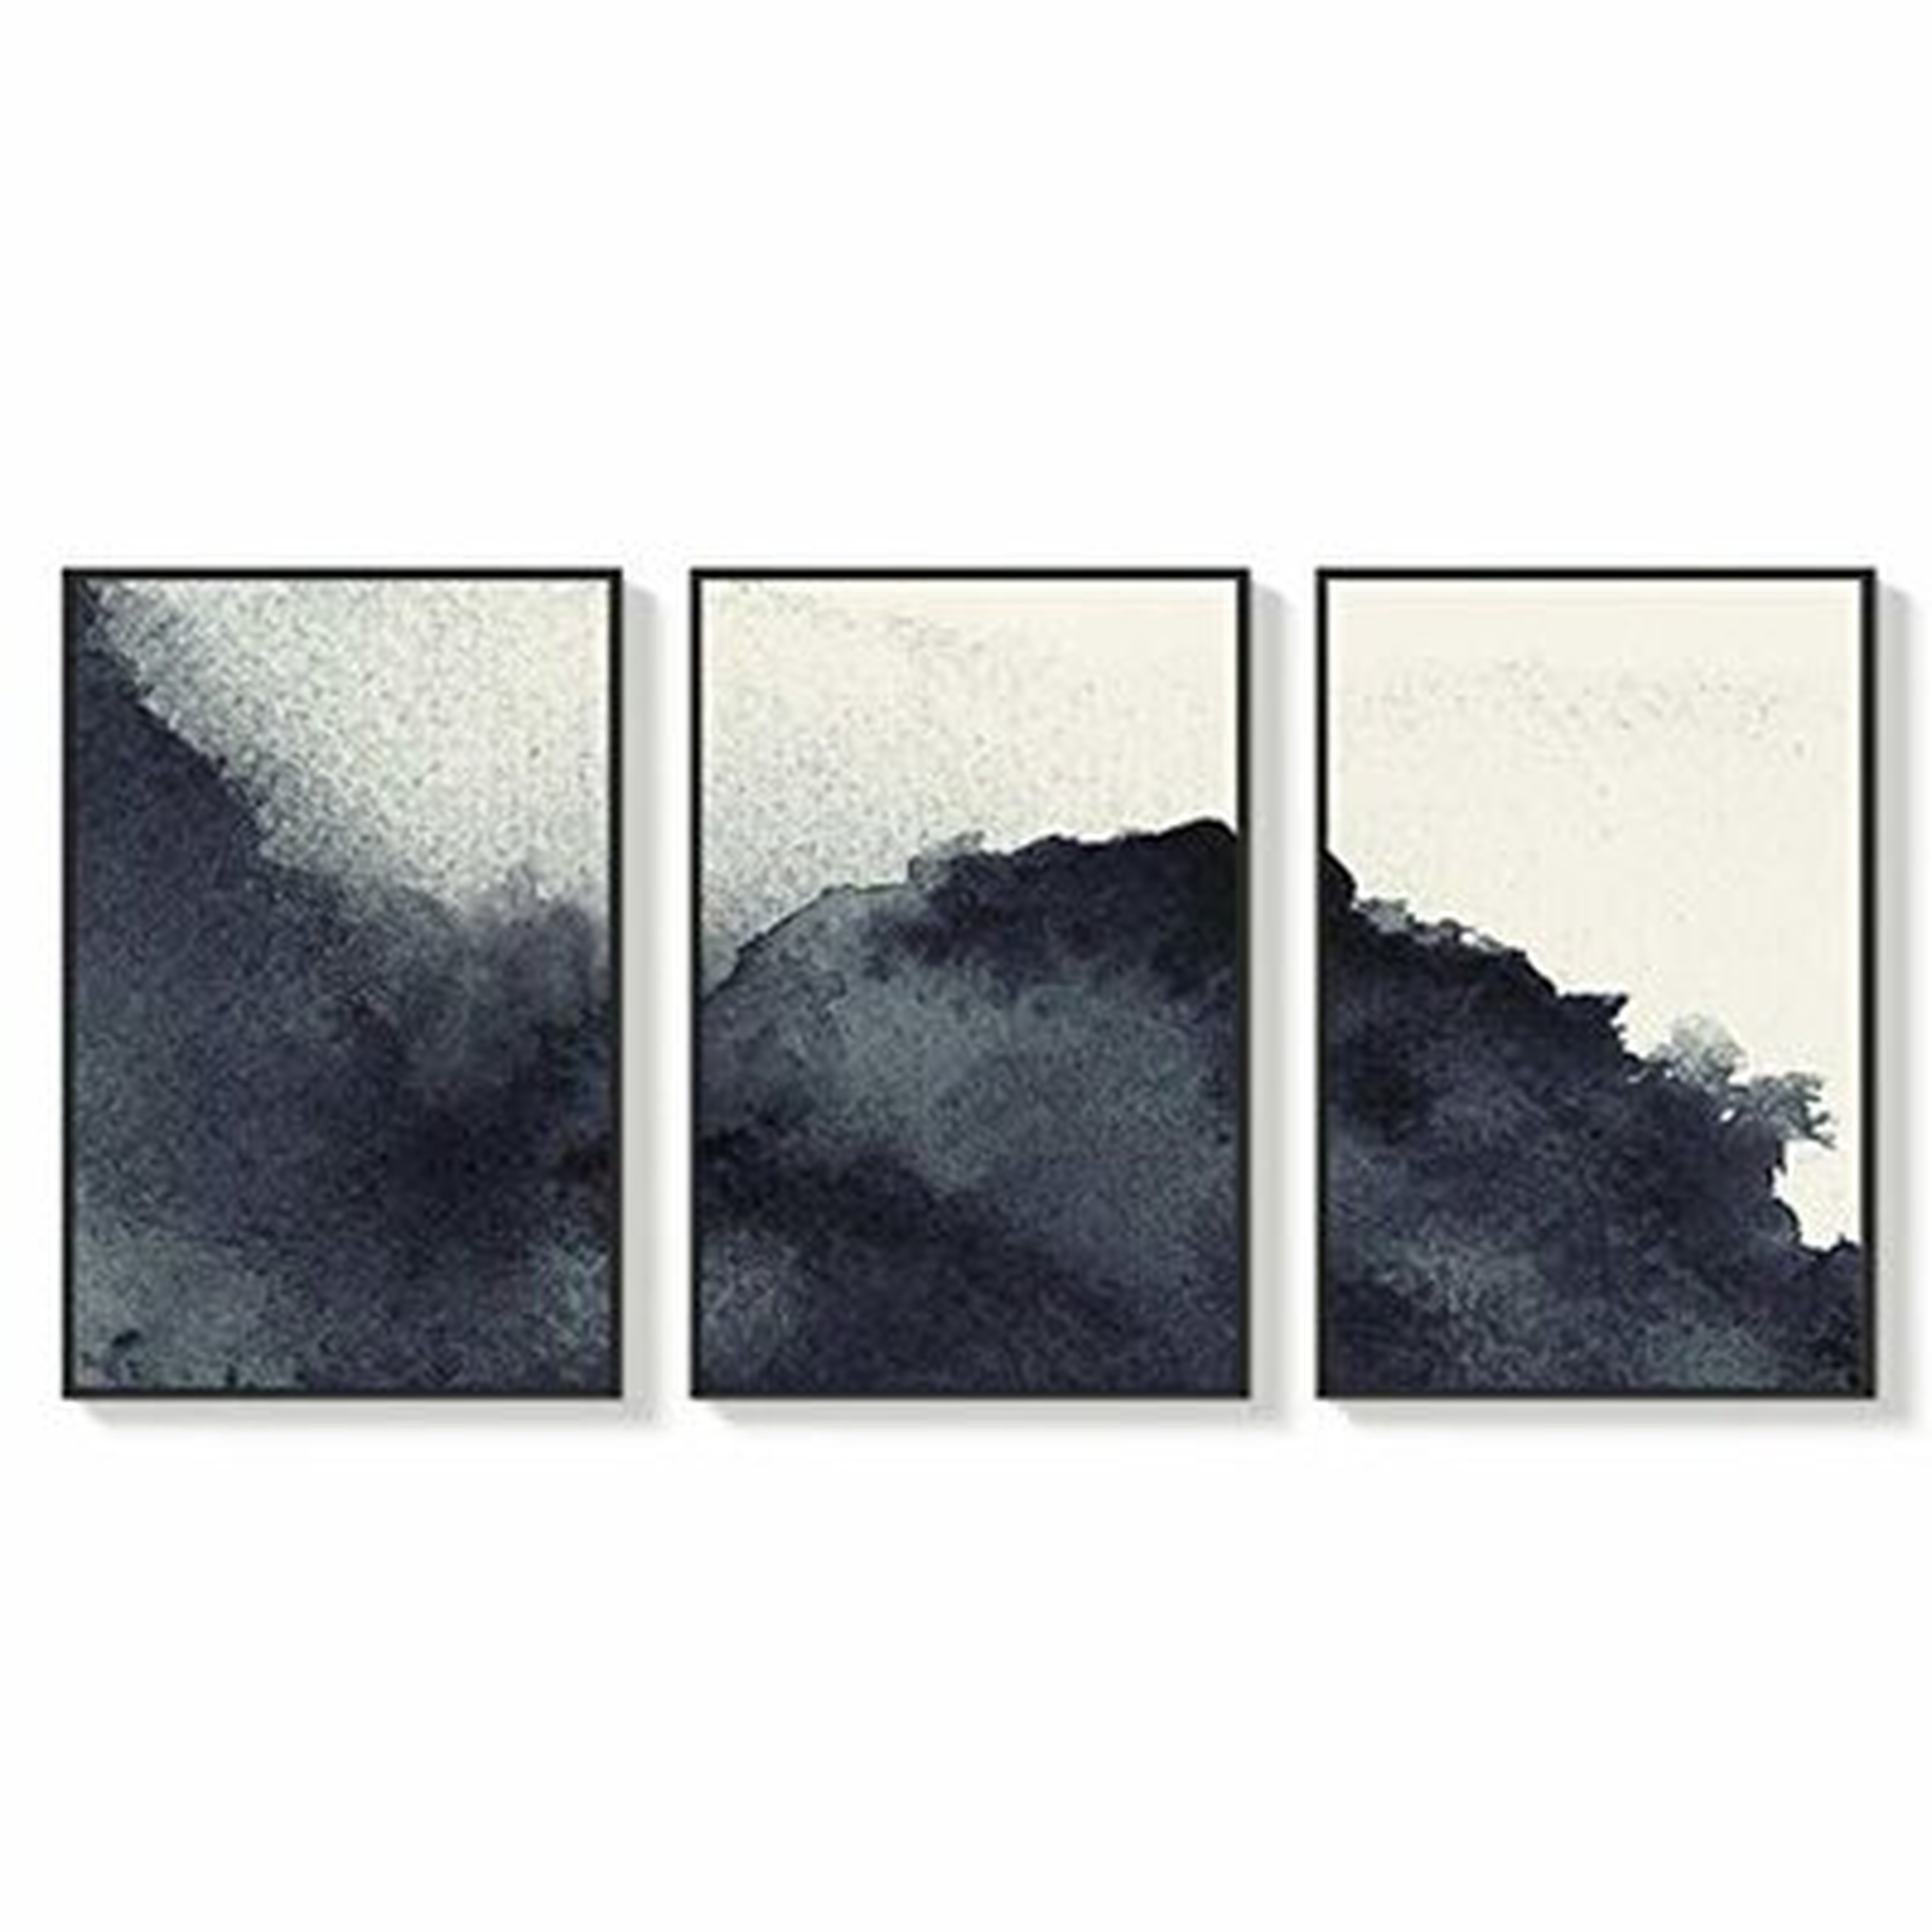 Ivy Bronx Framed Canvas Wall Art For Living Room, Bedroom Abstract Zen Canvas Prints For Home Decoration Ready To Hanging - 24"X36"X3 Panels - Wayfair